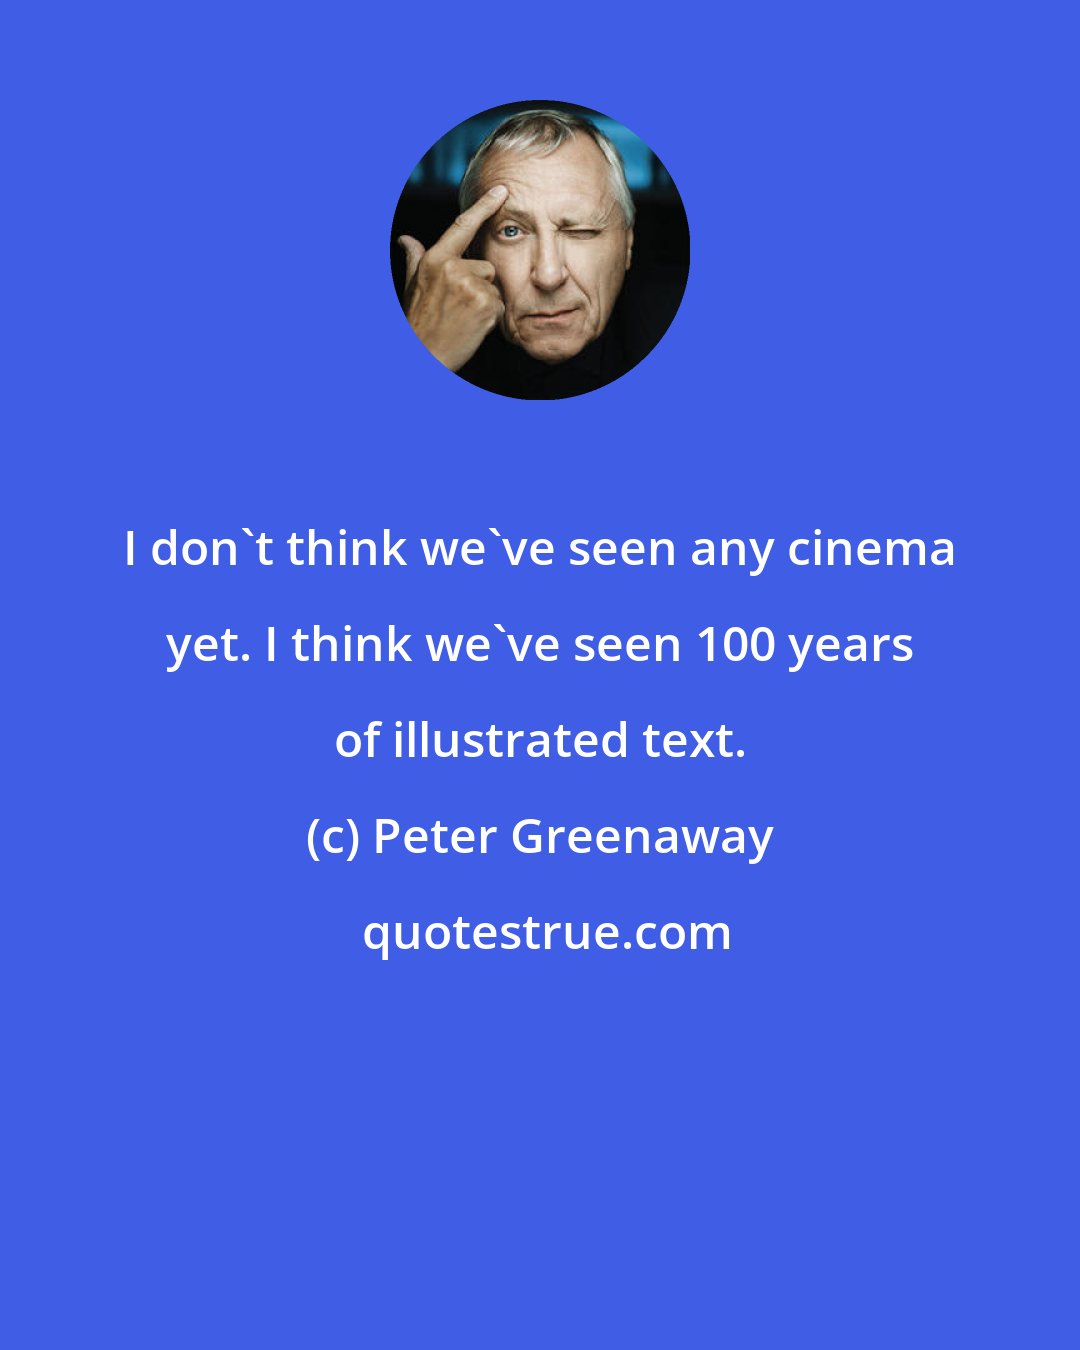 Peter Greenaway: I don't think we've seen any cinema yet. I think we've seen 100 years of illustrated text.